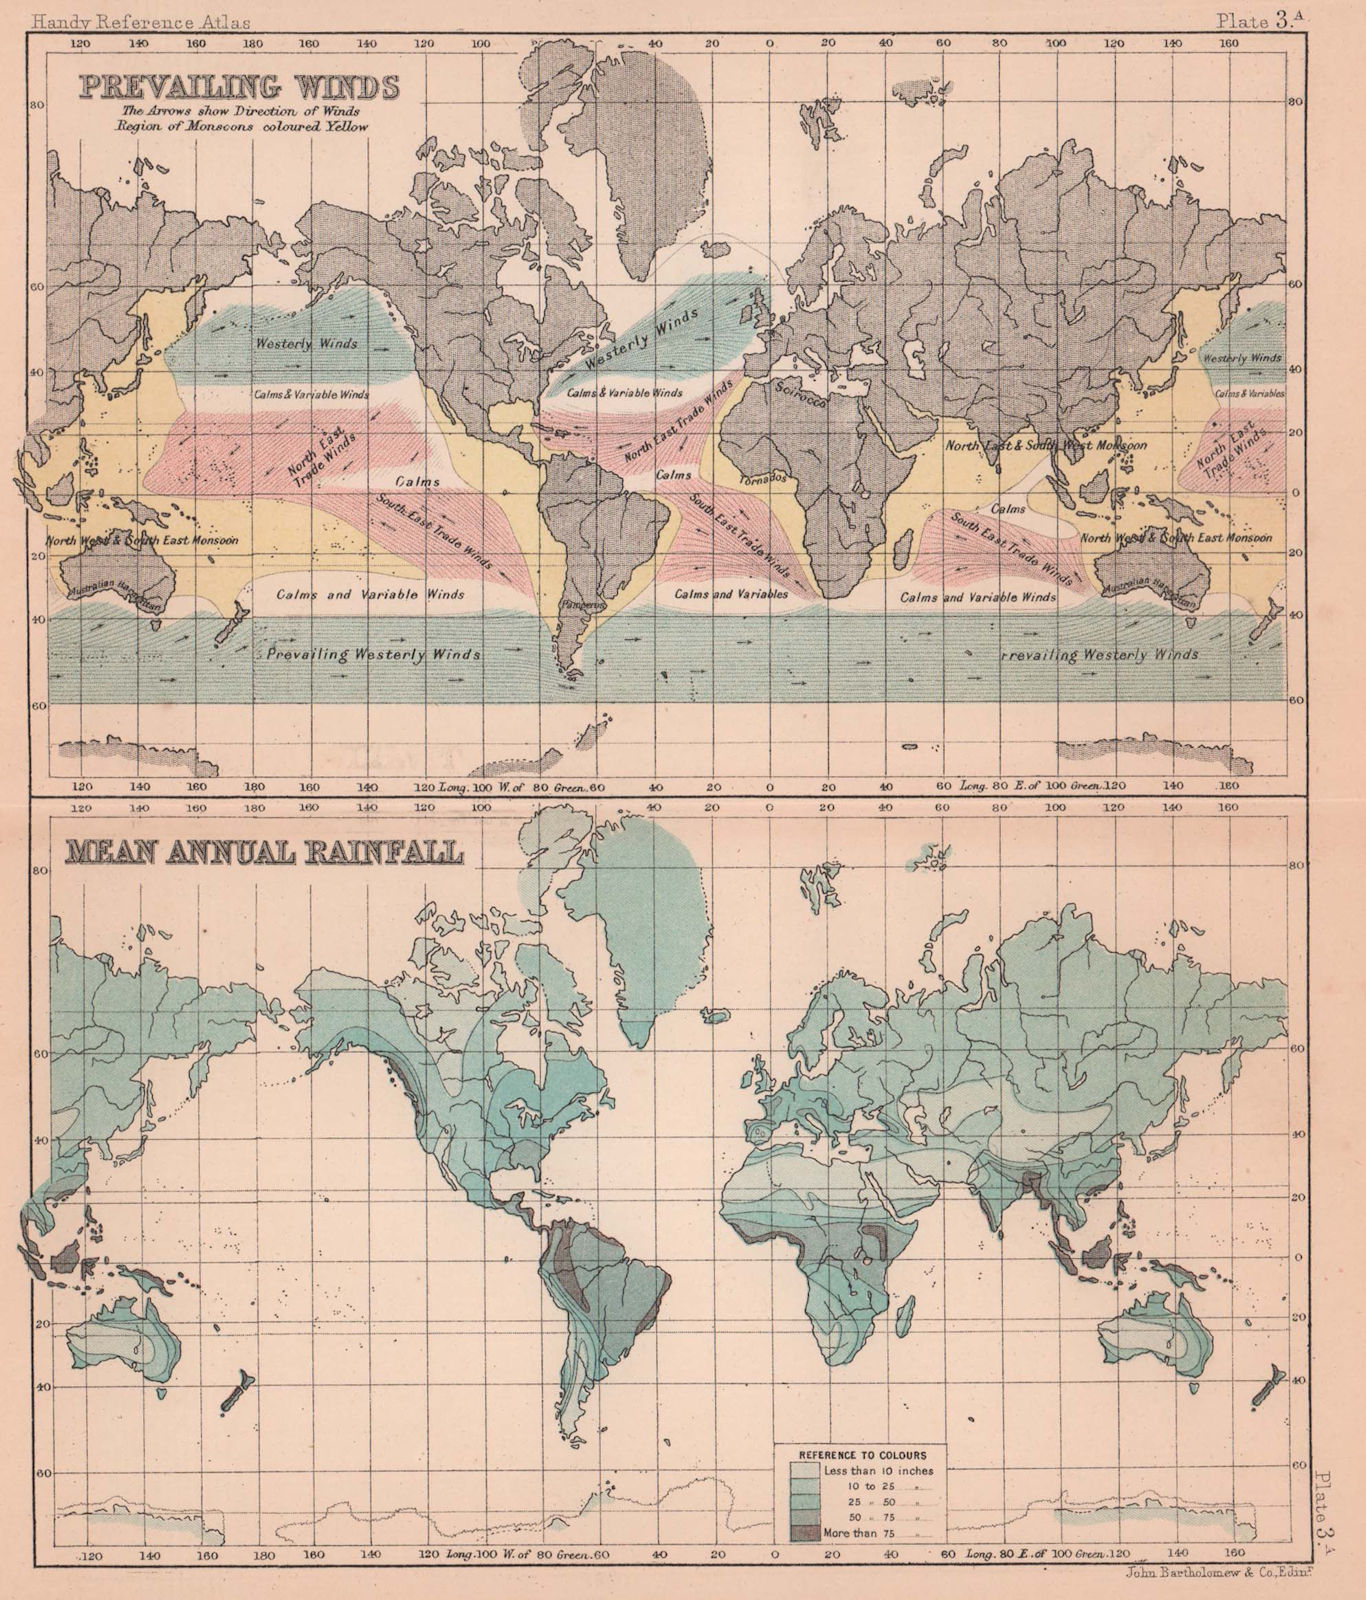 Associate Product Prevailing Winds & Mean Annual rainfall. World. BARTHOLOMEW 1893 old map